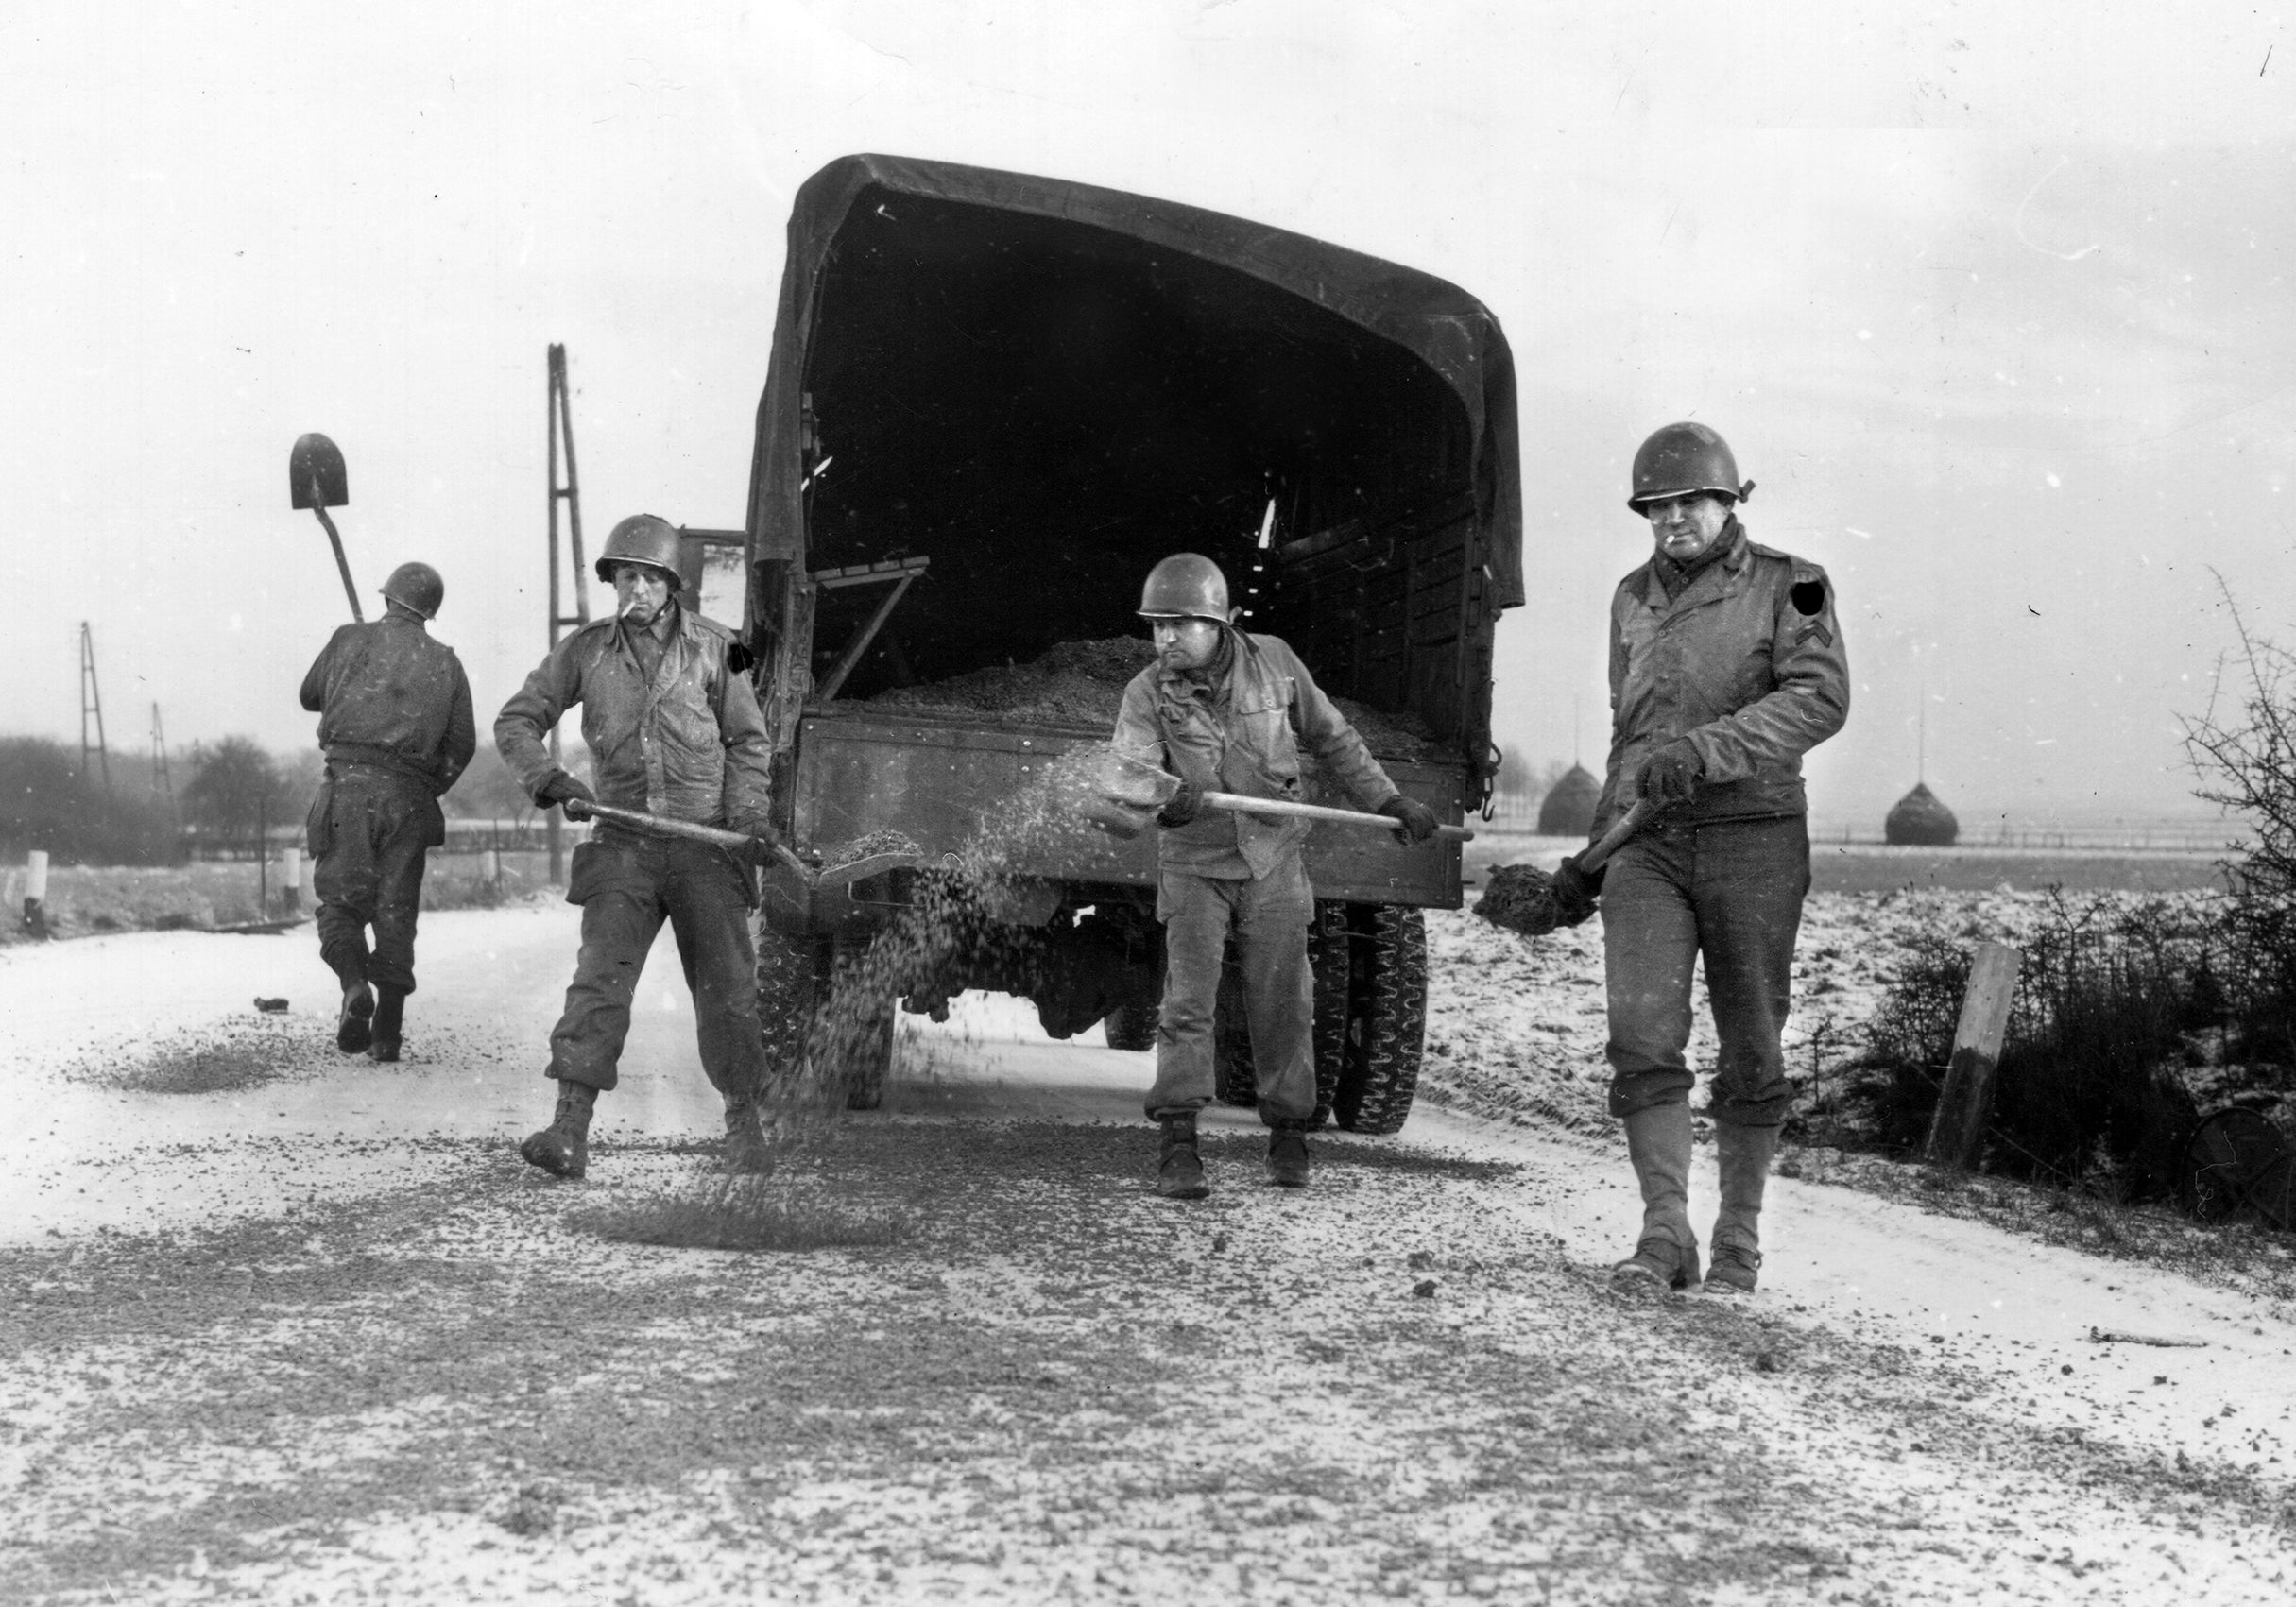 U.S. Army combat engineers shovel cinders onto an icy road in Belgium during the Battle of the Bulge. This effort was essential in moving Allied troops forward in response to the German thrust through the Ardennes Forest during December, 1944, into January, 1945.